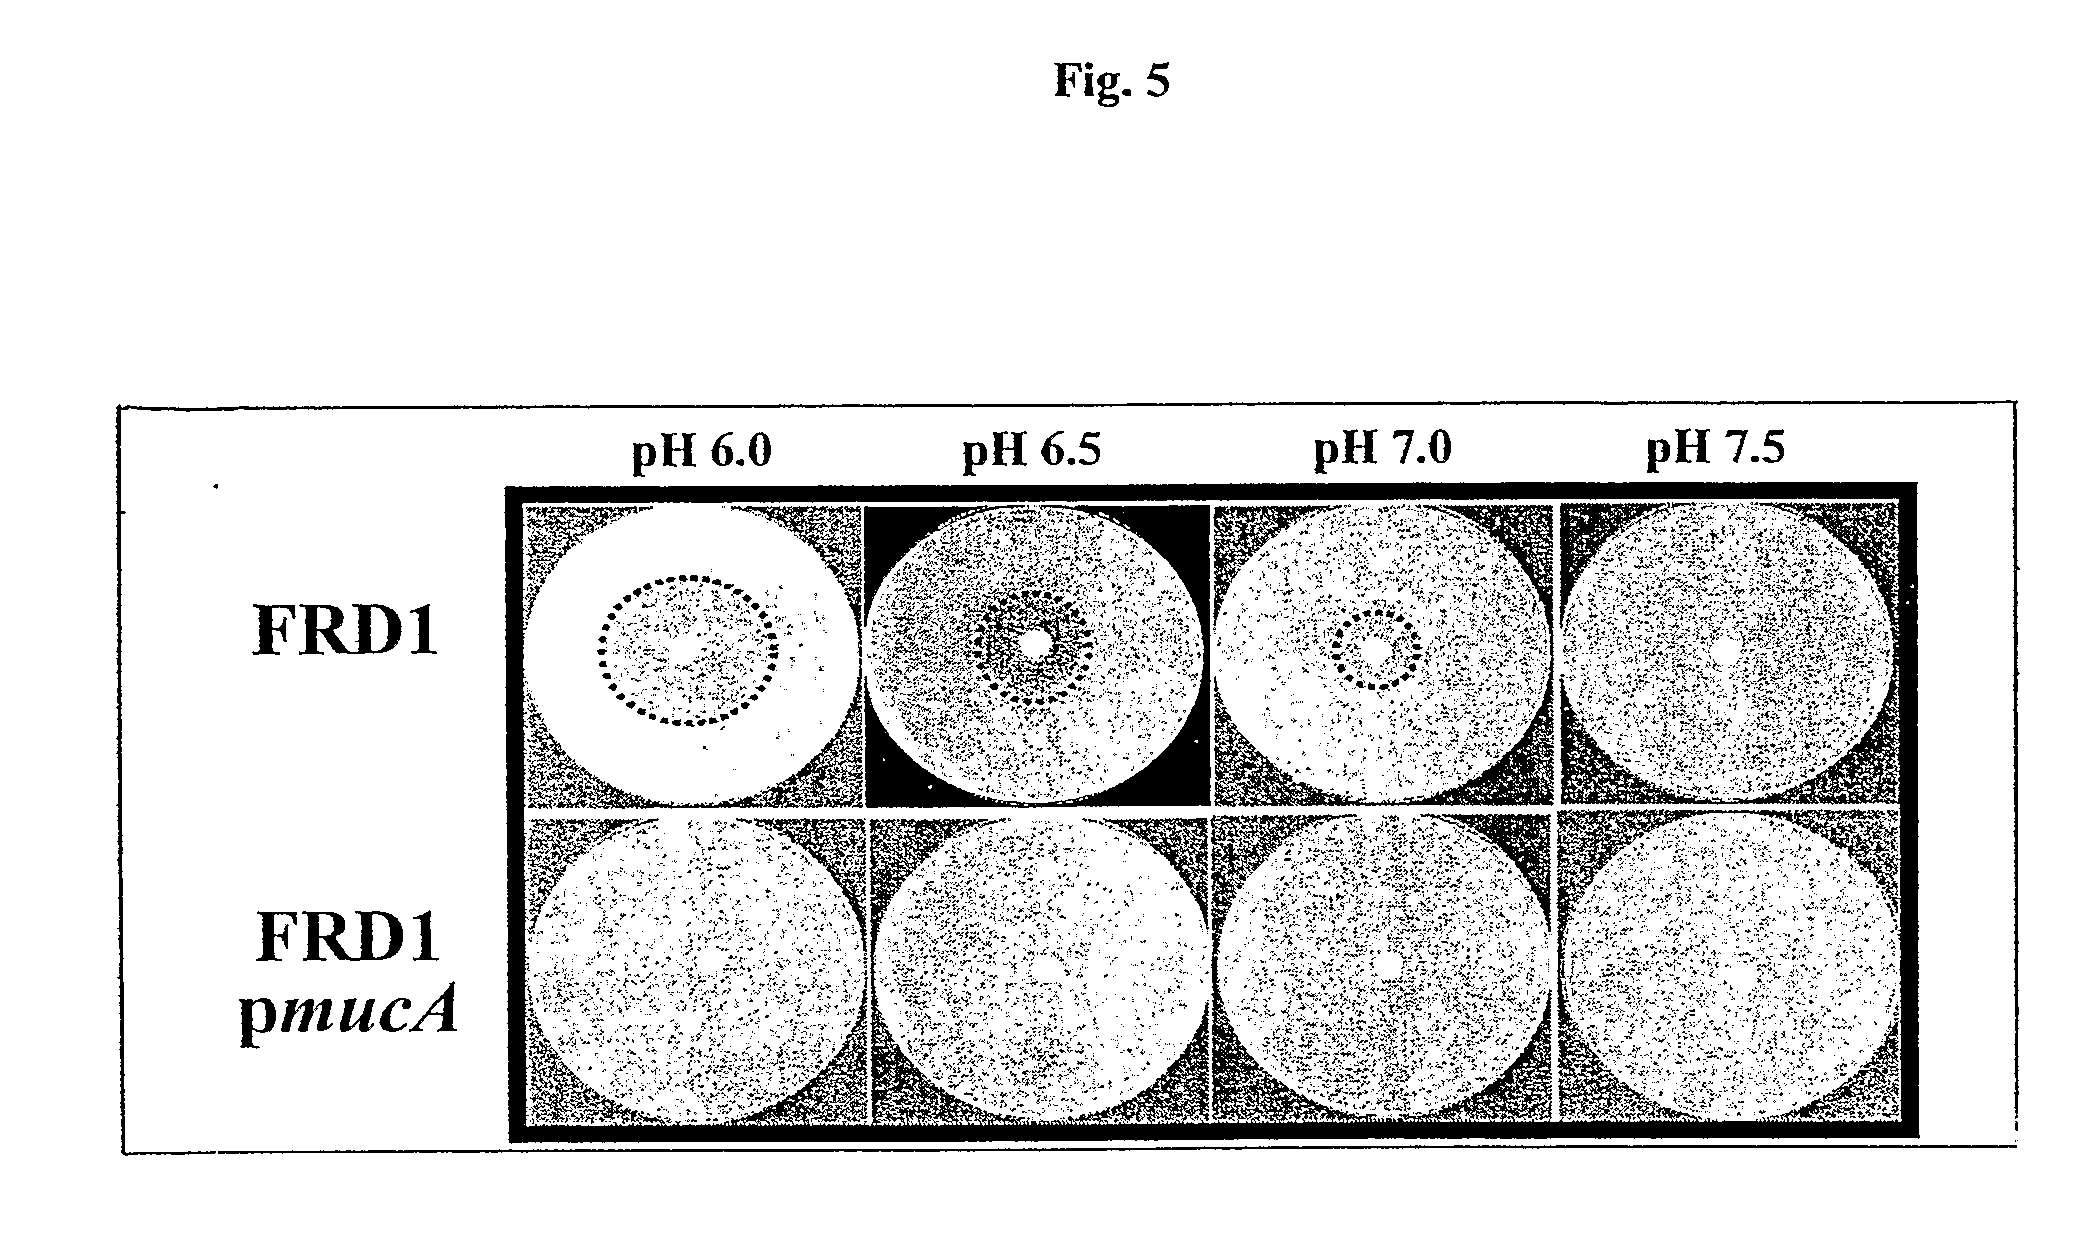 Methods for Treating Bacterial Respiratory Tract Infections in an Individual Using Acidified Nitrite